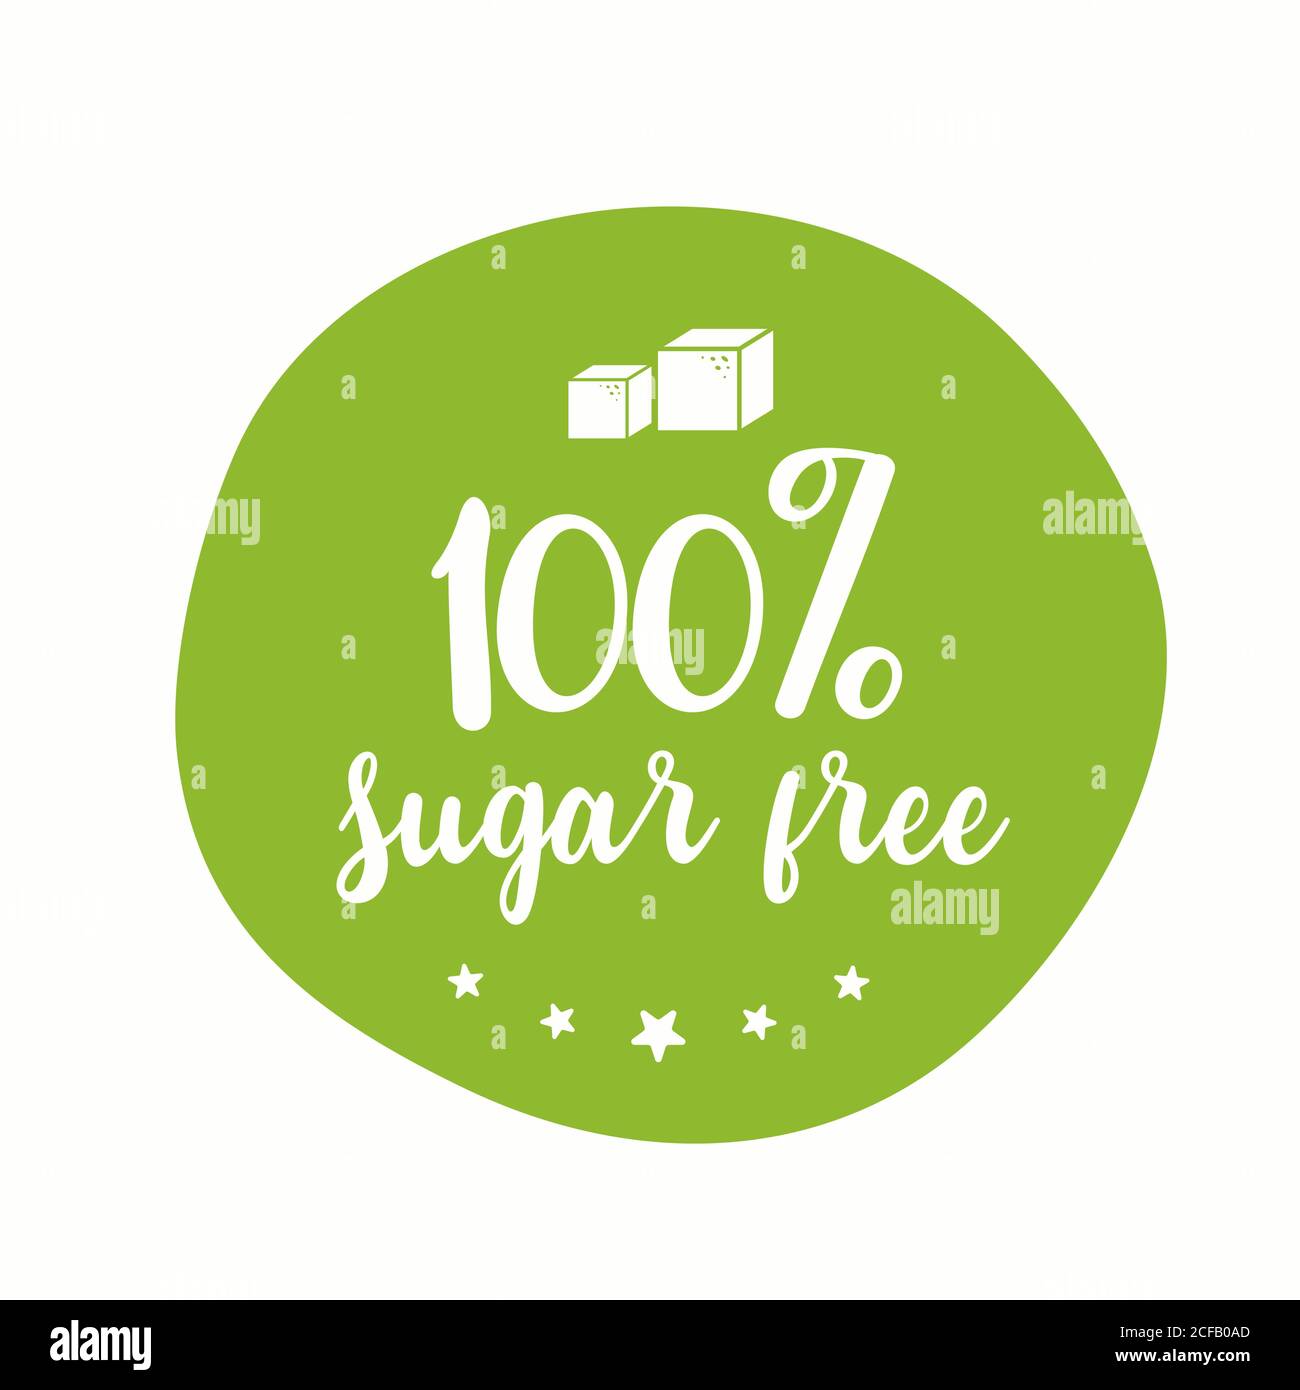 Sugar free label. Vector sugar cubes in circle icon for no sugar added product package design. Stock Vector